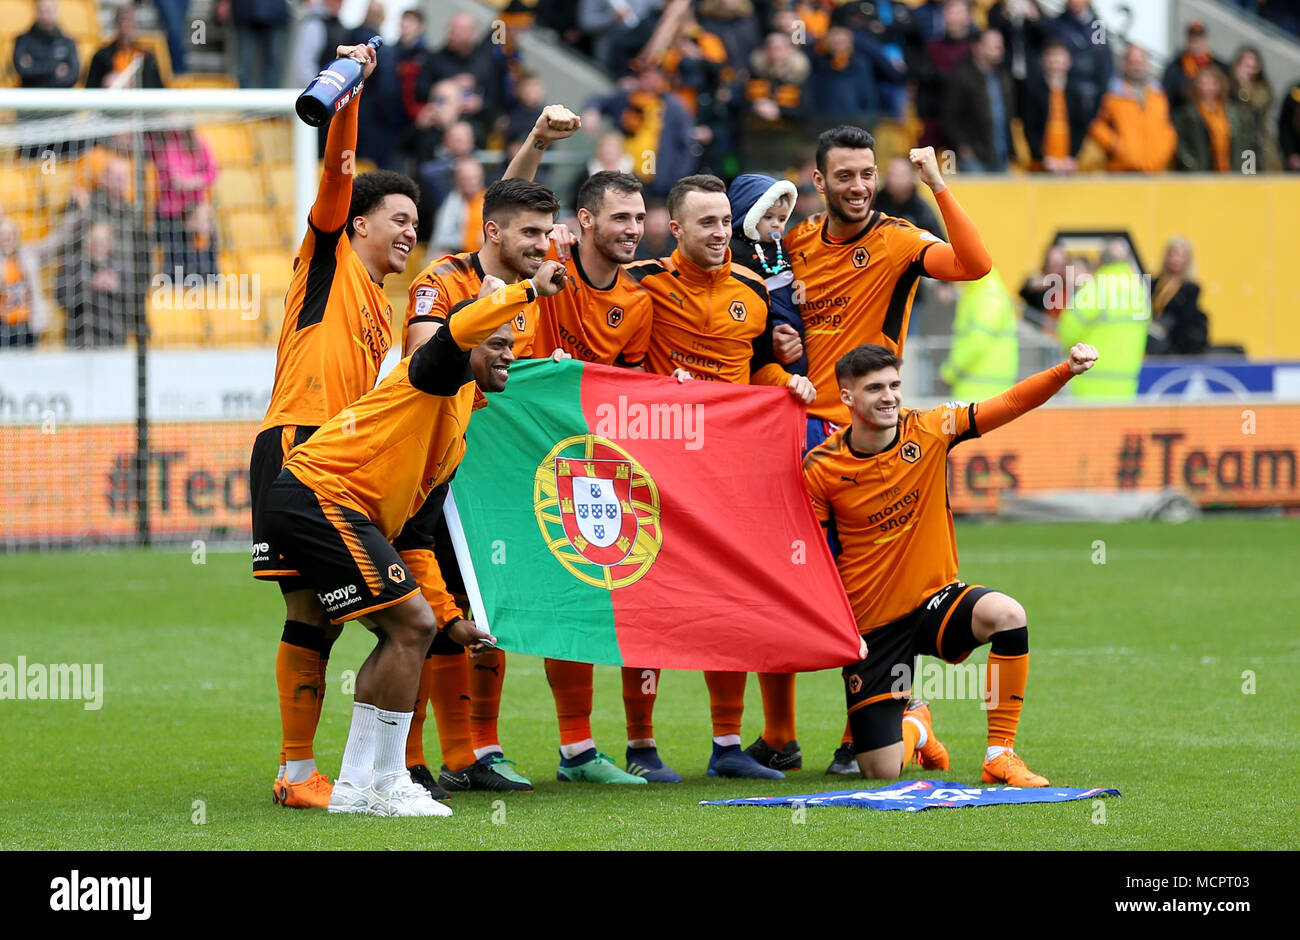 The Portuguese contingent of Wolverhampton Wanderers players celebrate  winning promotion to the Premier League after the Sky Bet Championship  match at Molineux, Wolverhampton Stock Photo - Alamy